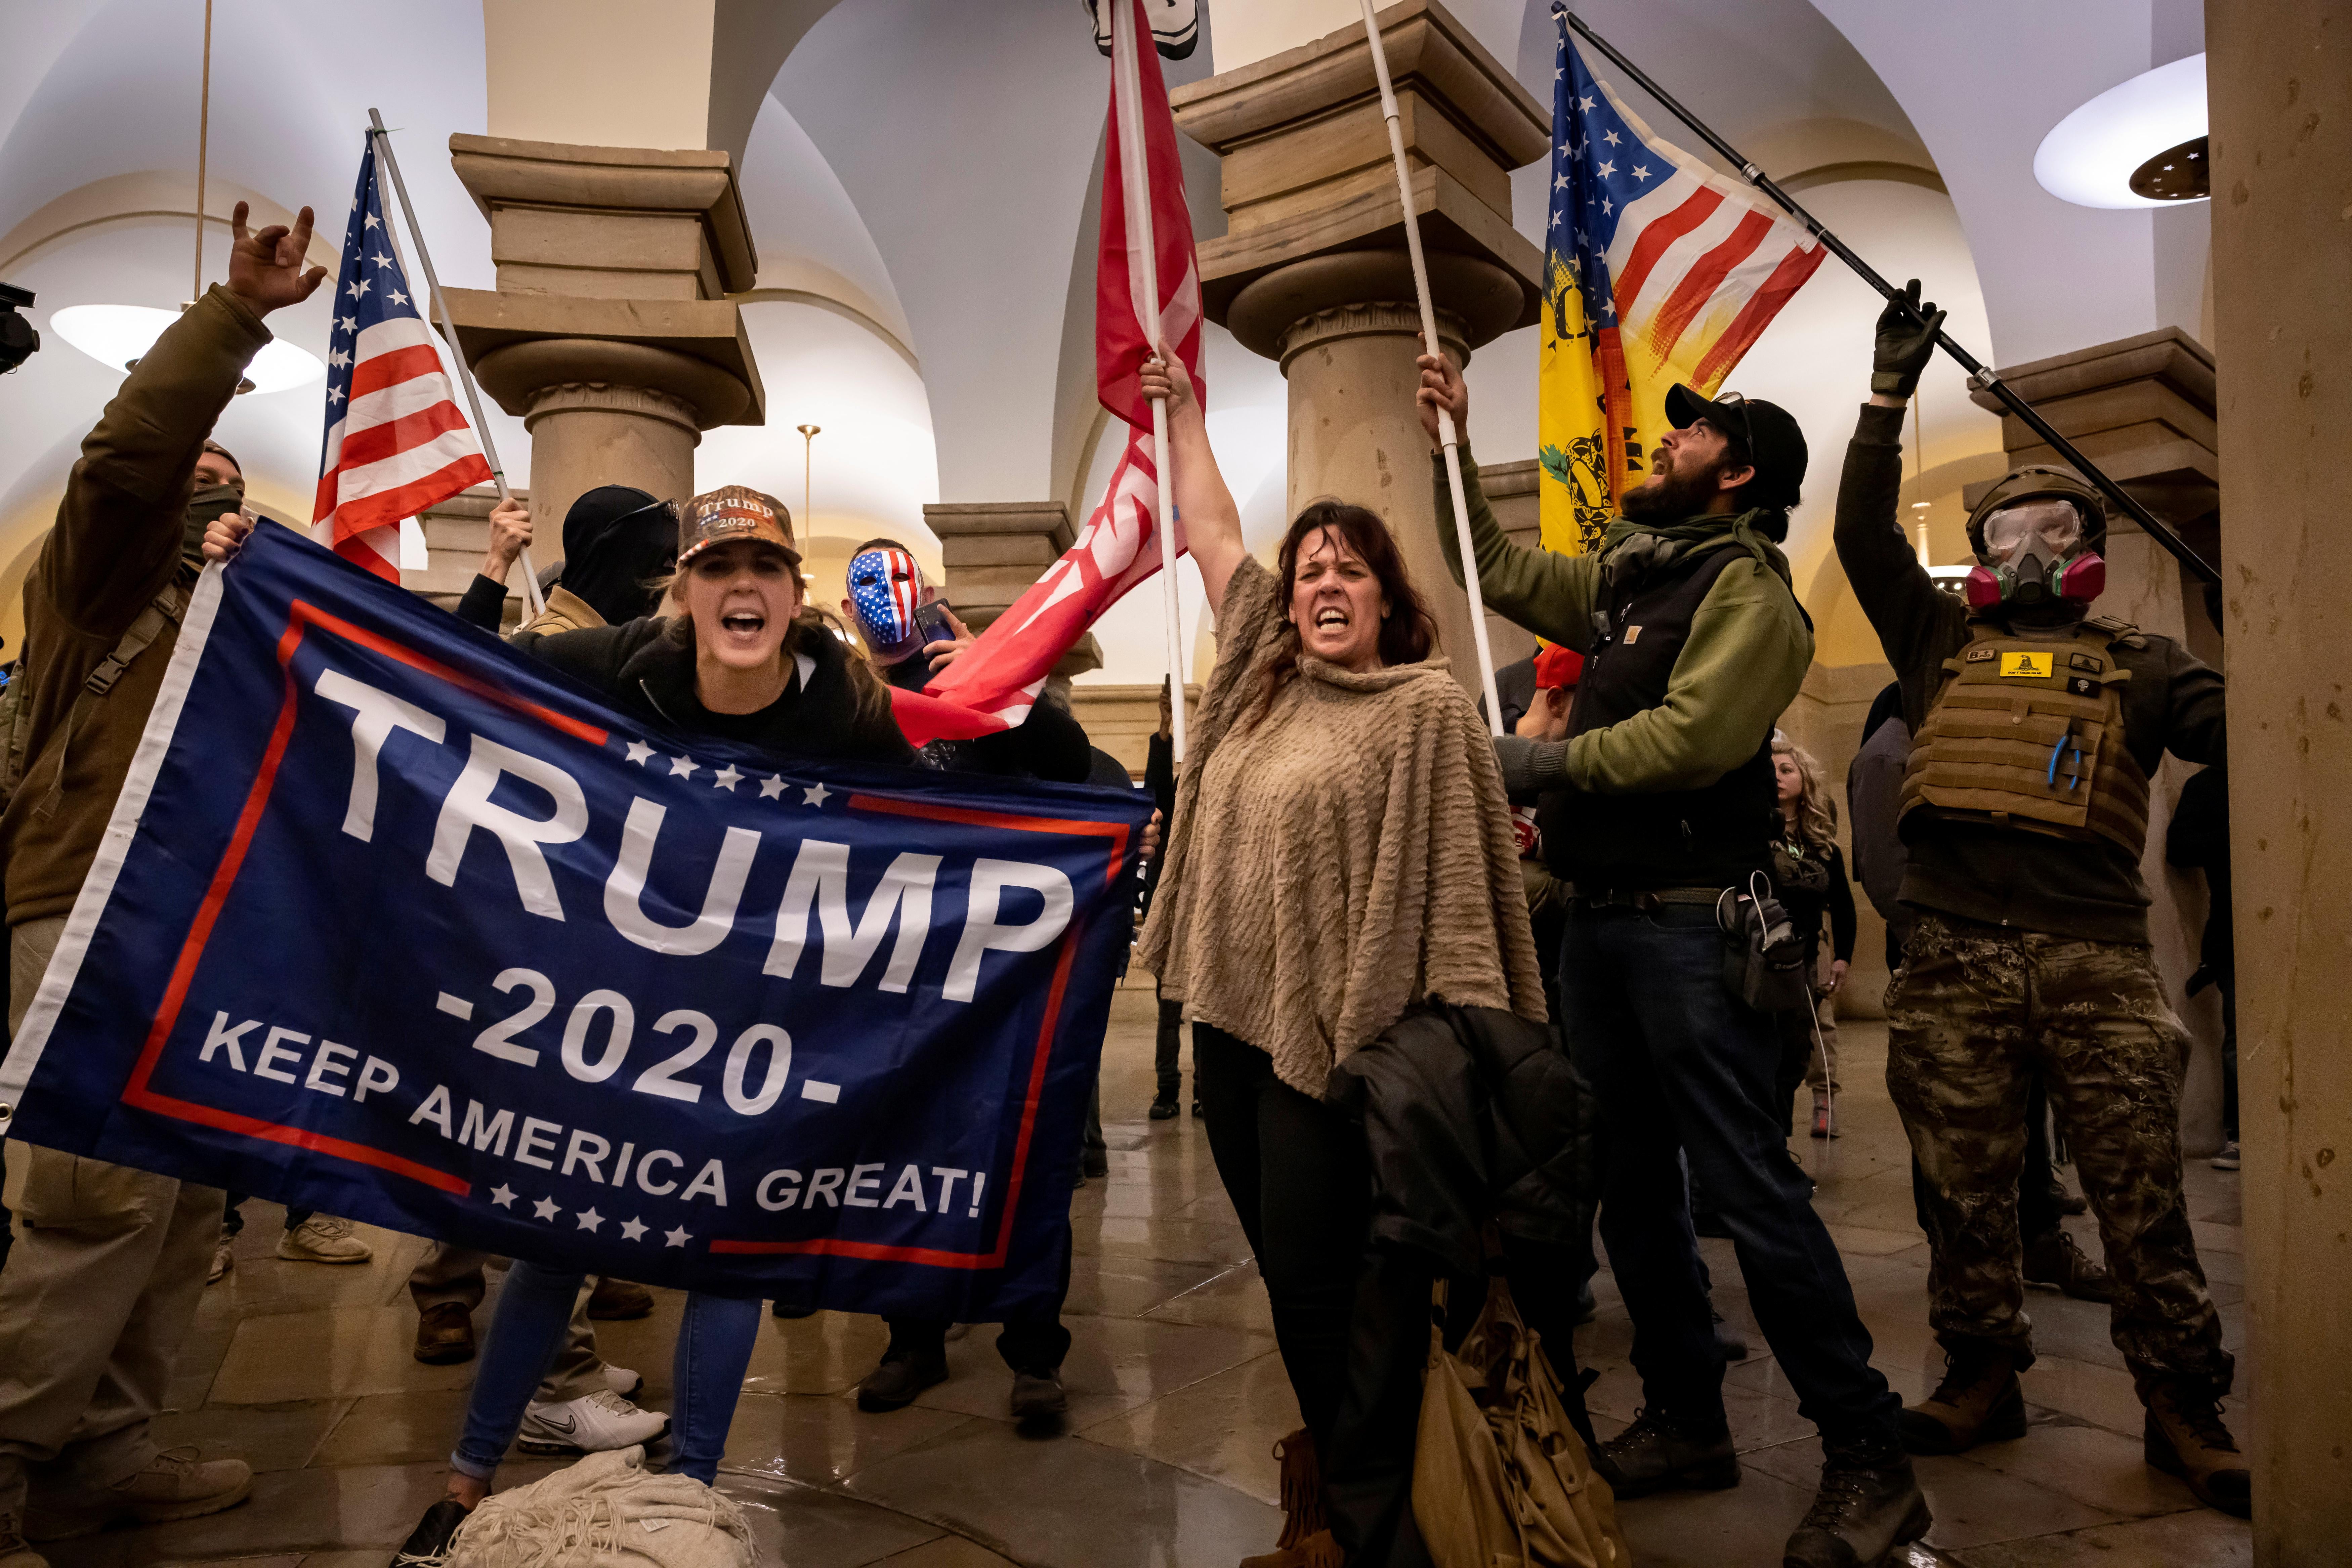 woman yelling while holding a trump flag, a woman holding an American flag, and some dudes cosplaying as militia members inside the Capitol